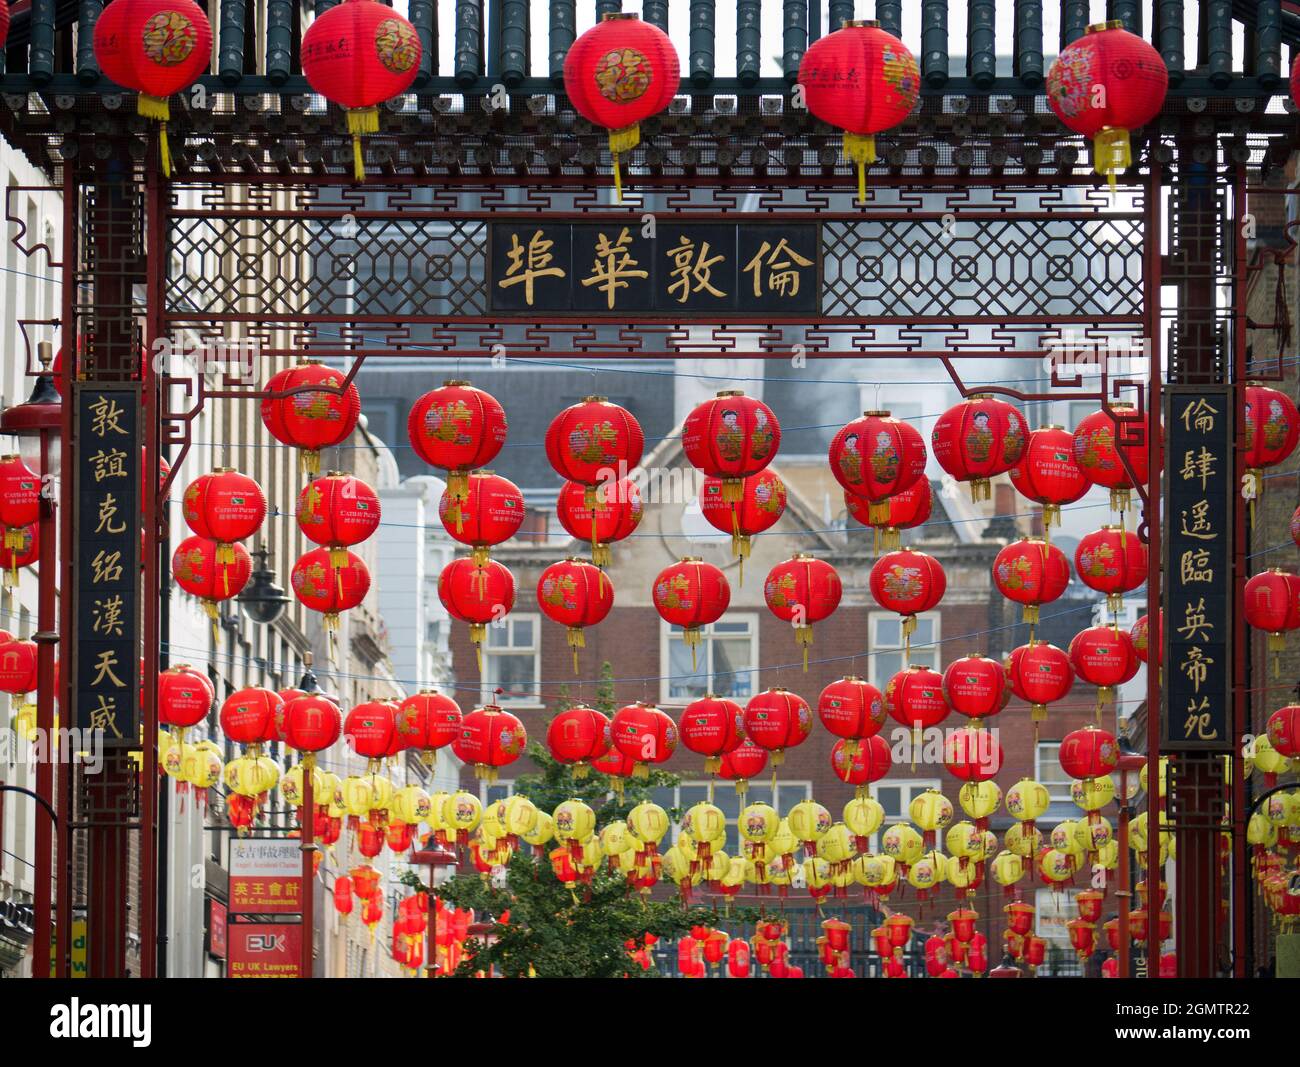 Chinatown, London decorated with traditional red lanterns during the Spring Festival of Chinese New Year. Festivals at the turn of the  Lunar Year are Stock Photo